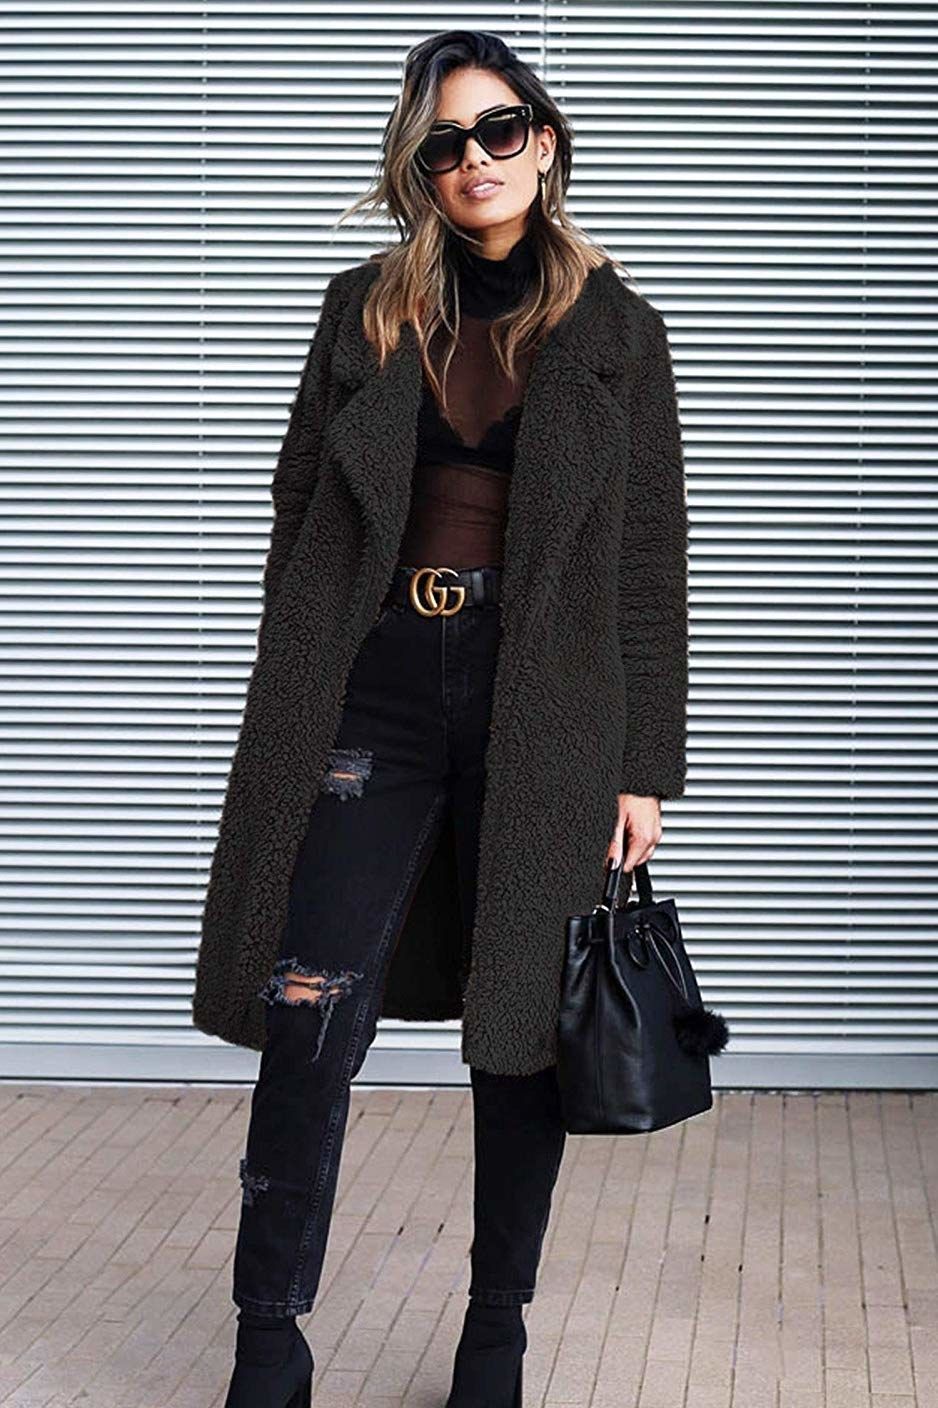 5 Unique Winter Office Outfits Ideas, Ditch The Boring Sweater & Pants